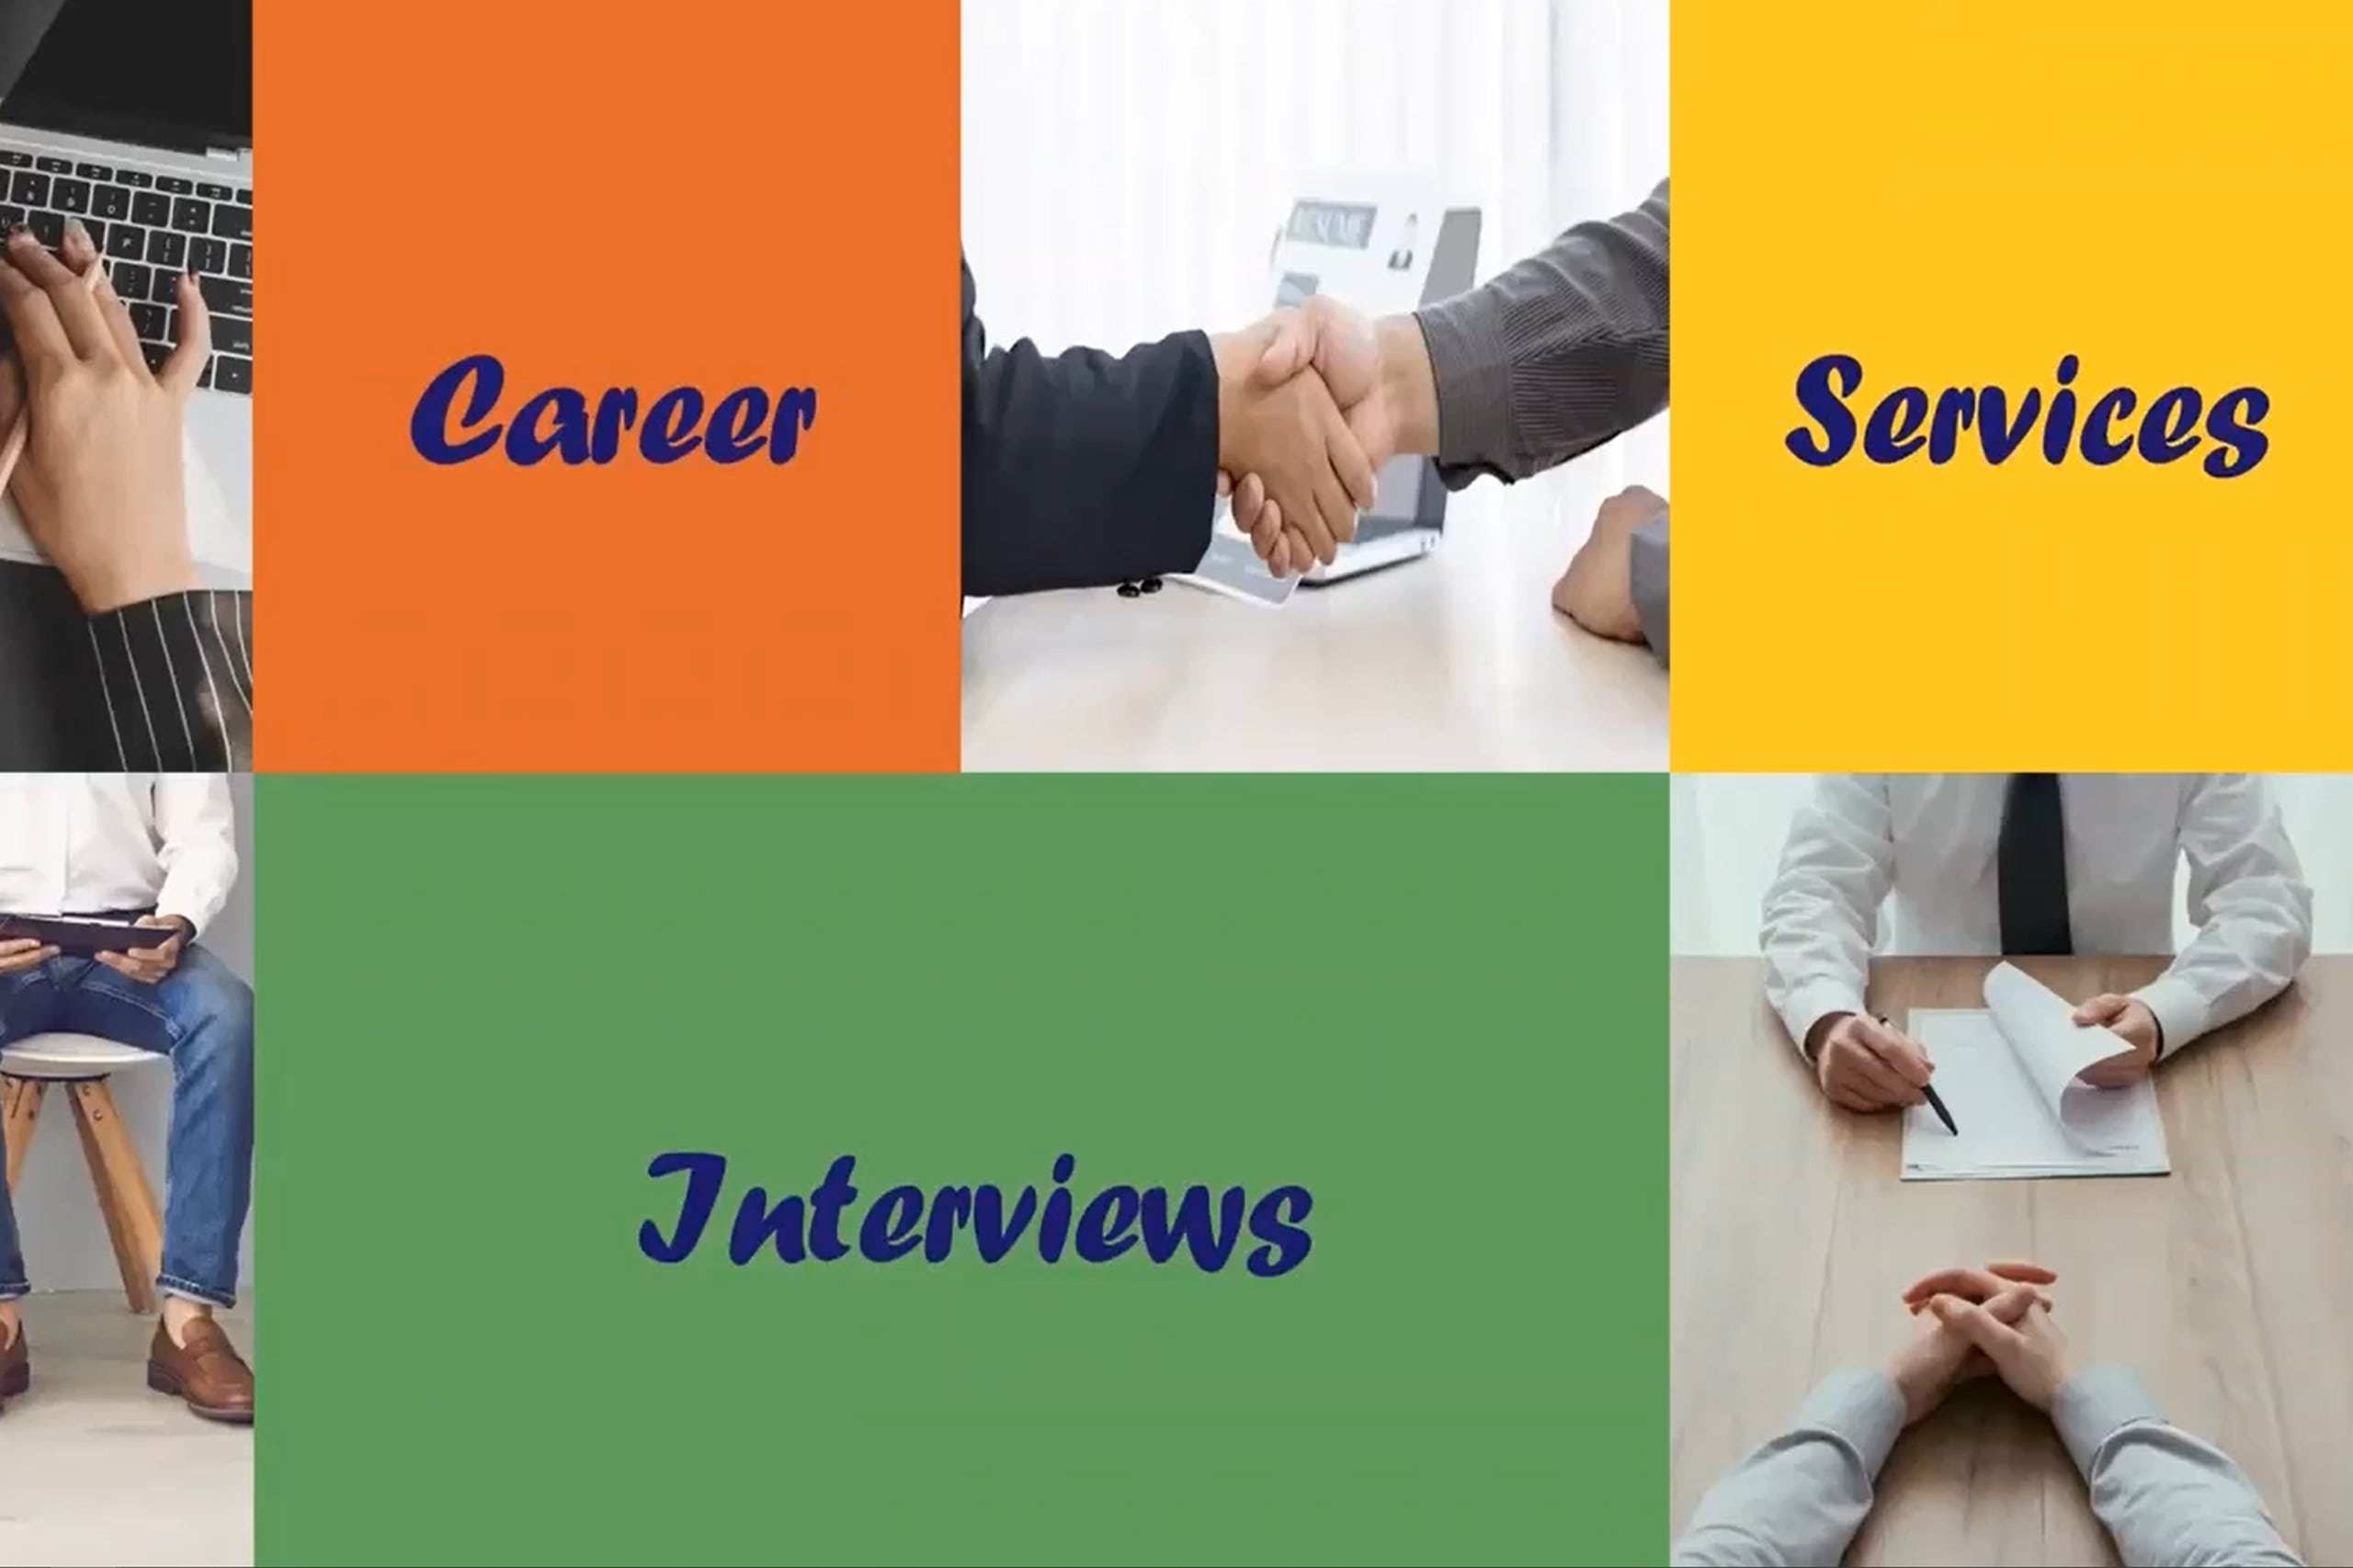 Career Services - Interviews